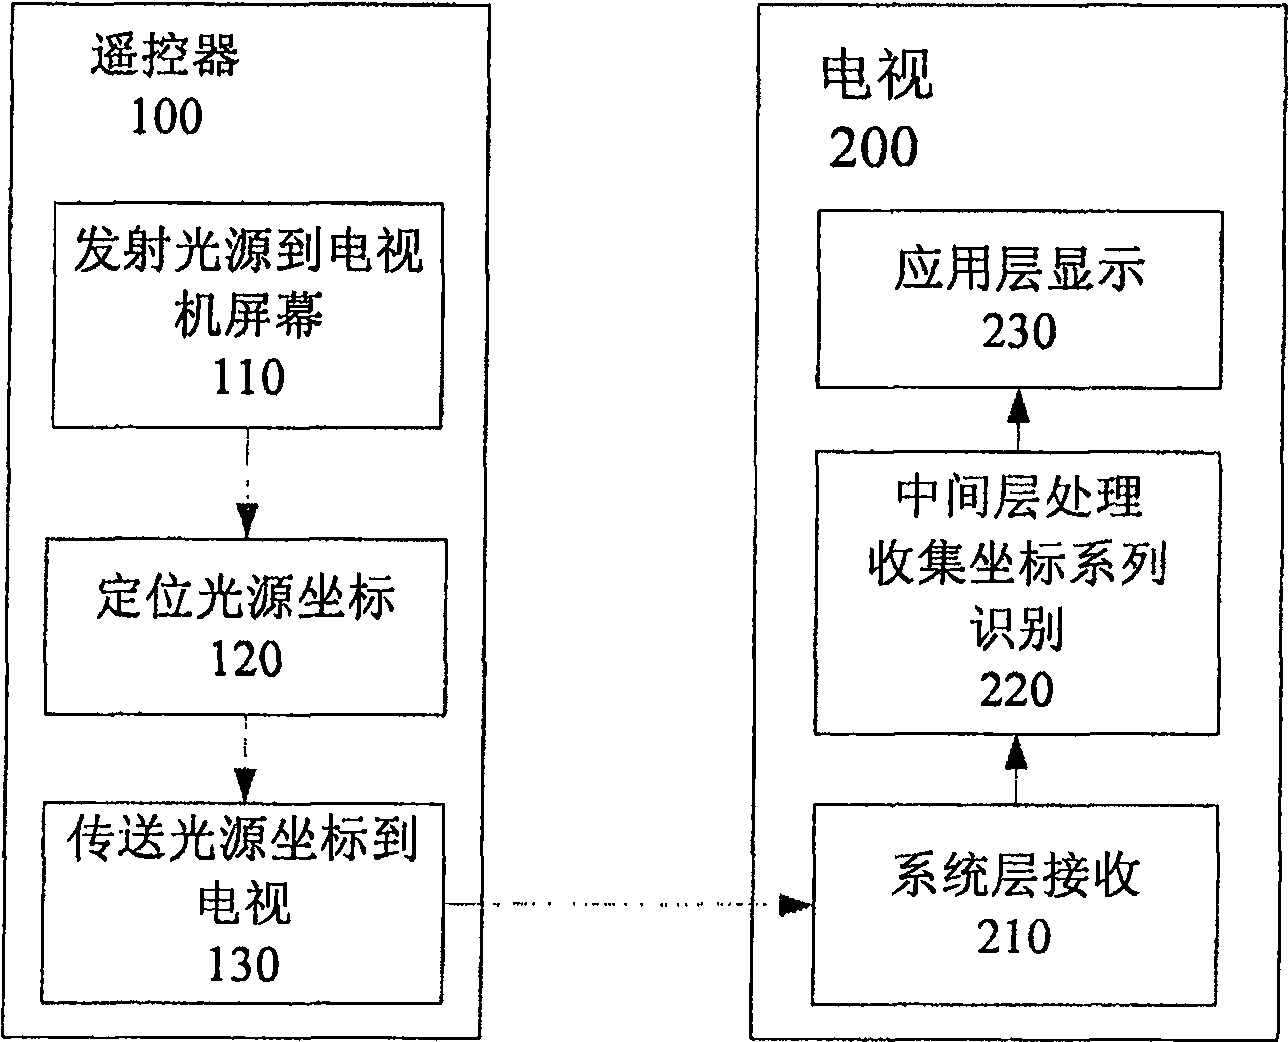 Method of direct screen writing for television system distant end